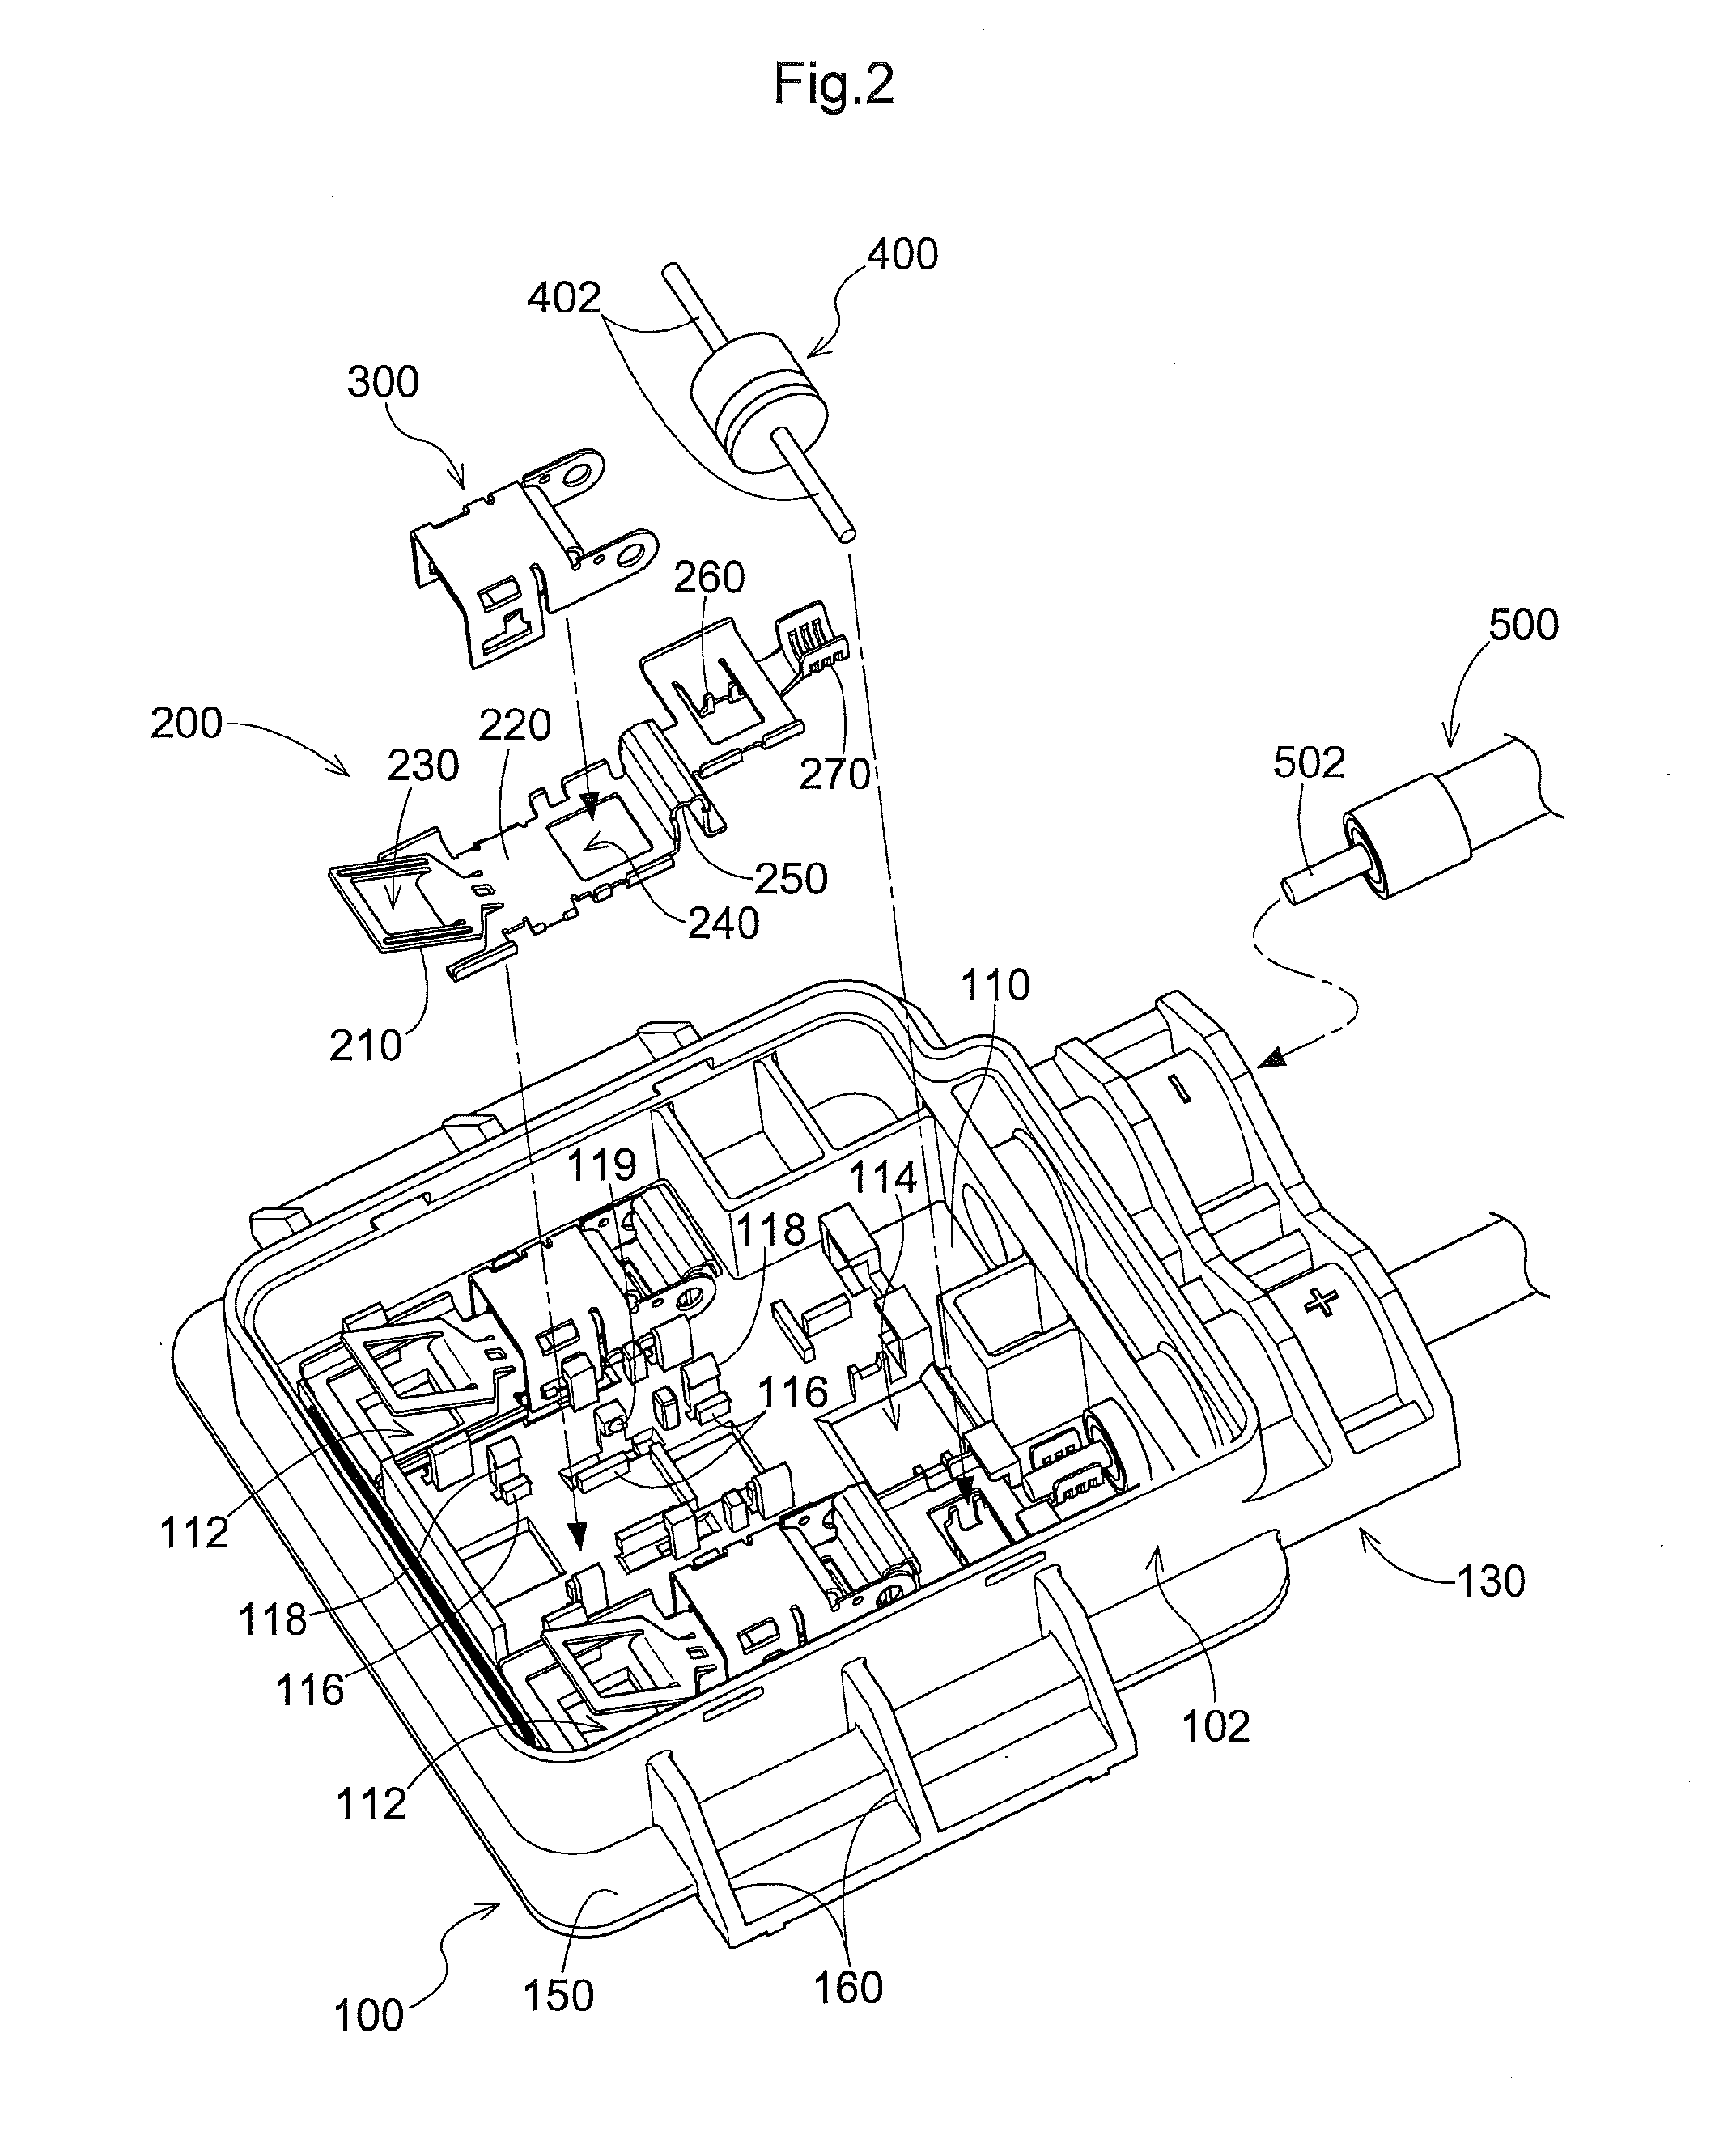 Terminal Box and Method of Connecting Output Line